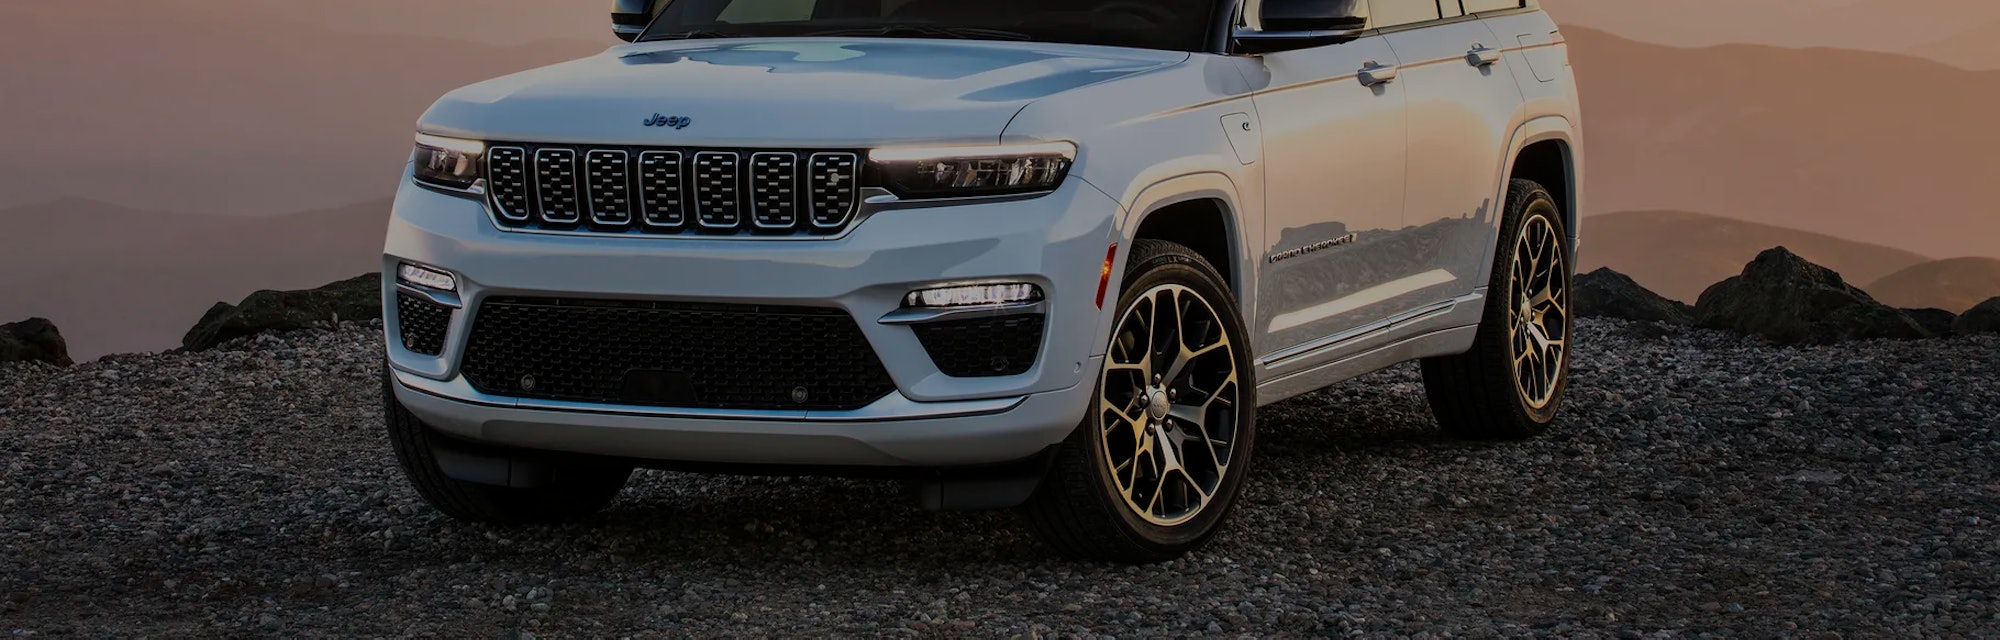 Jeep has unveiled a plug-in hybrid version of its Grand Cherokee SUV.